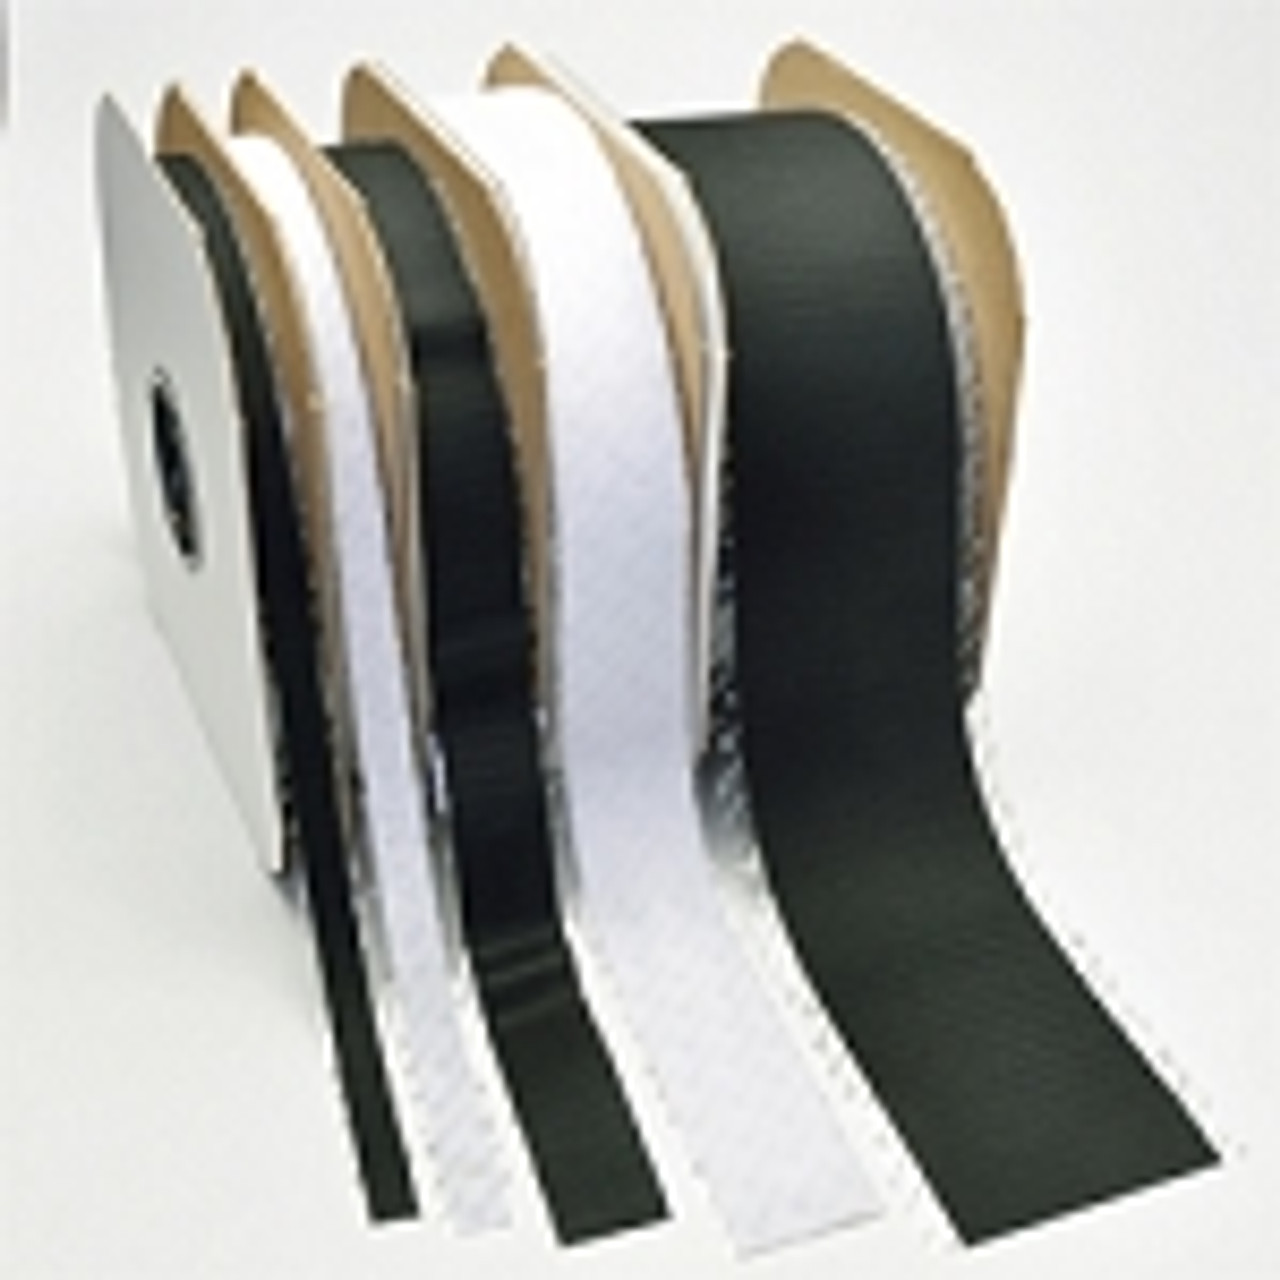 VELCRO Brand Fabric Fusion Heat Activated Adhesive Strips by